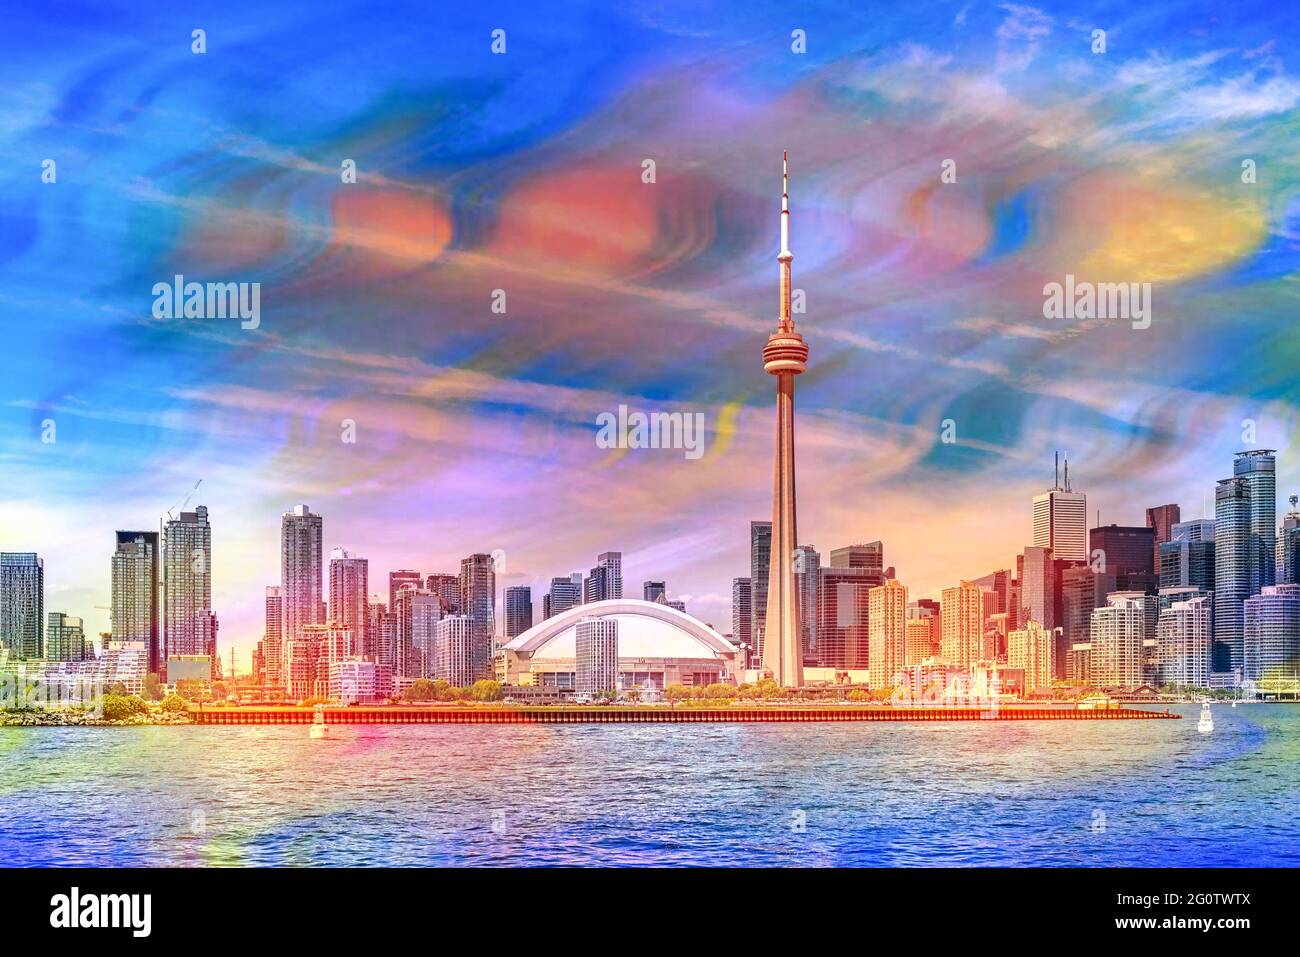 The Toronto city skyline during the daytime and seen from Lake Ontario, Canada Stock Photo